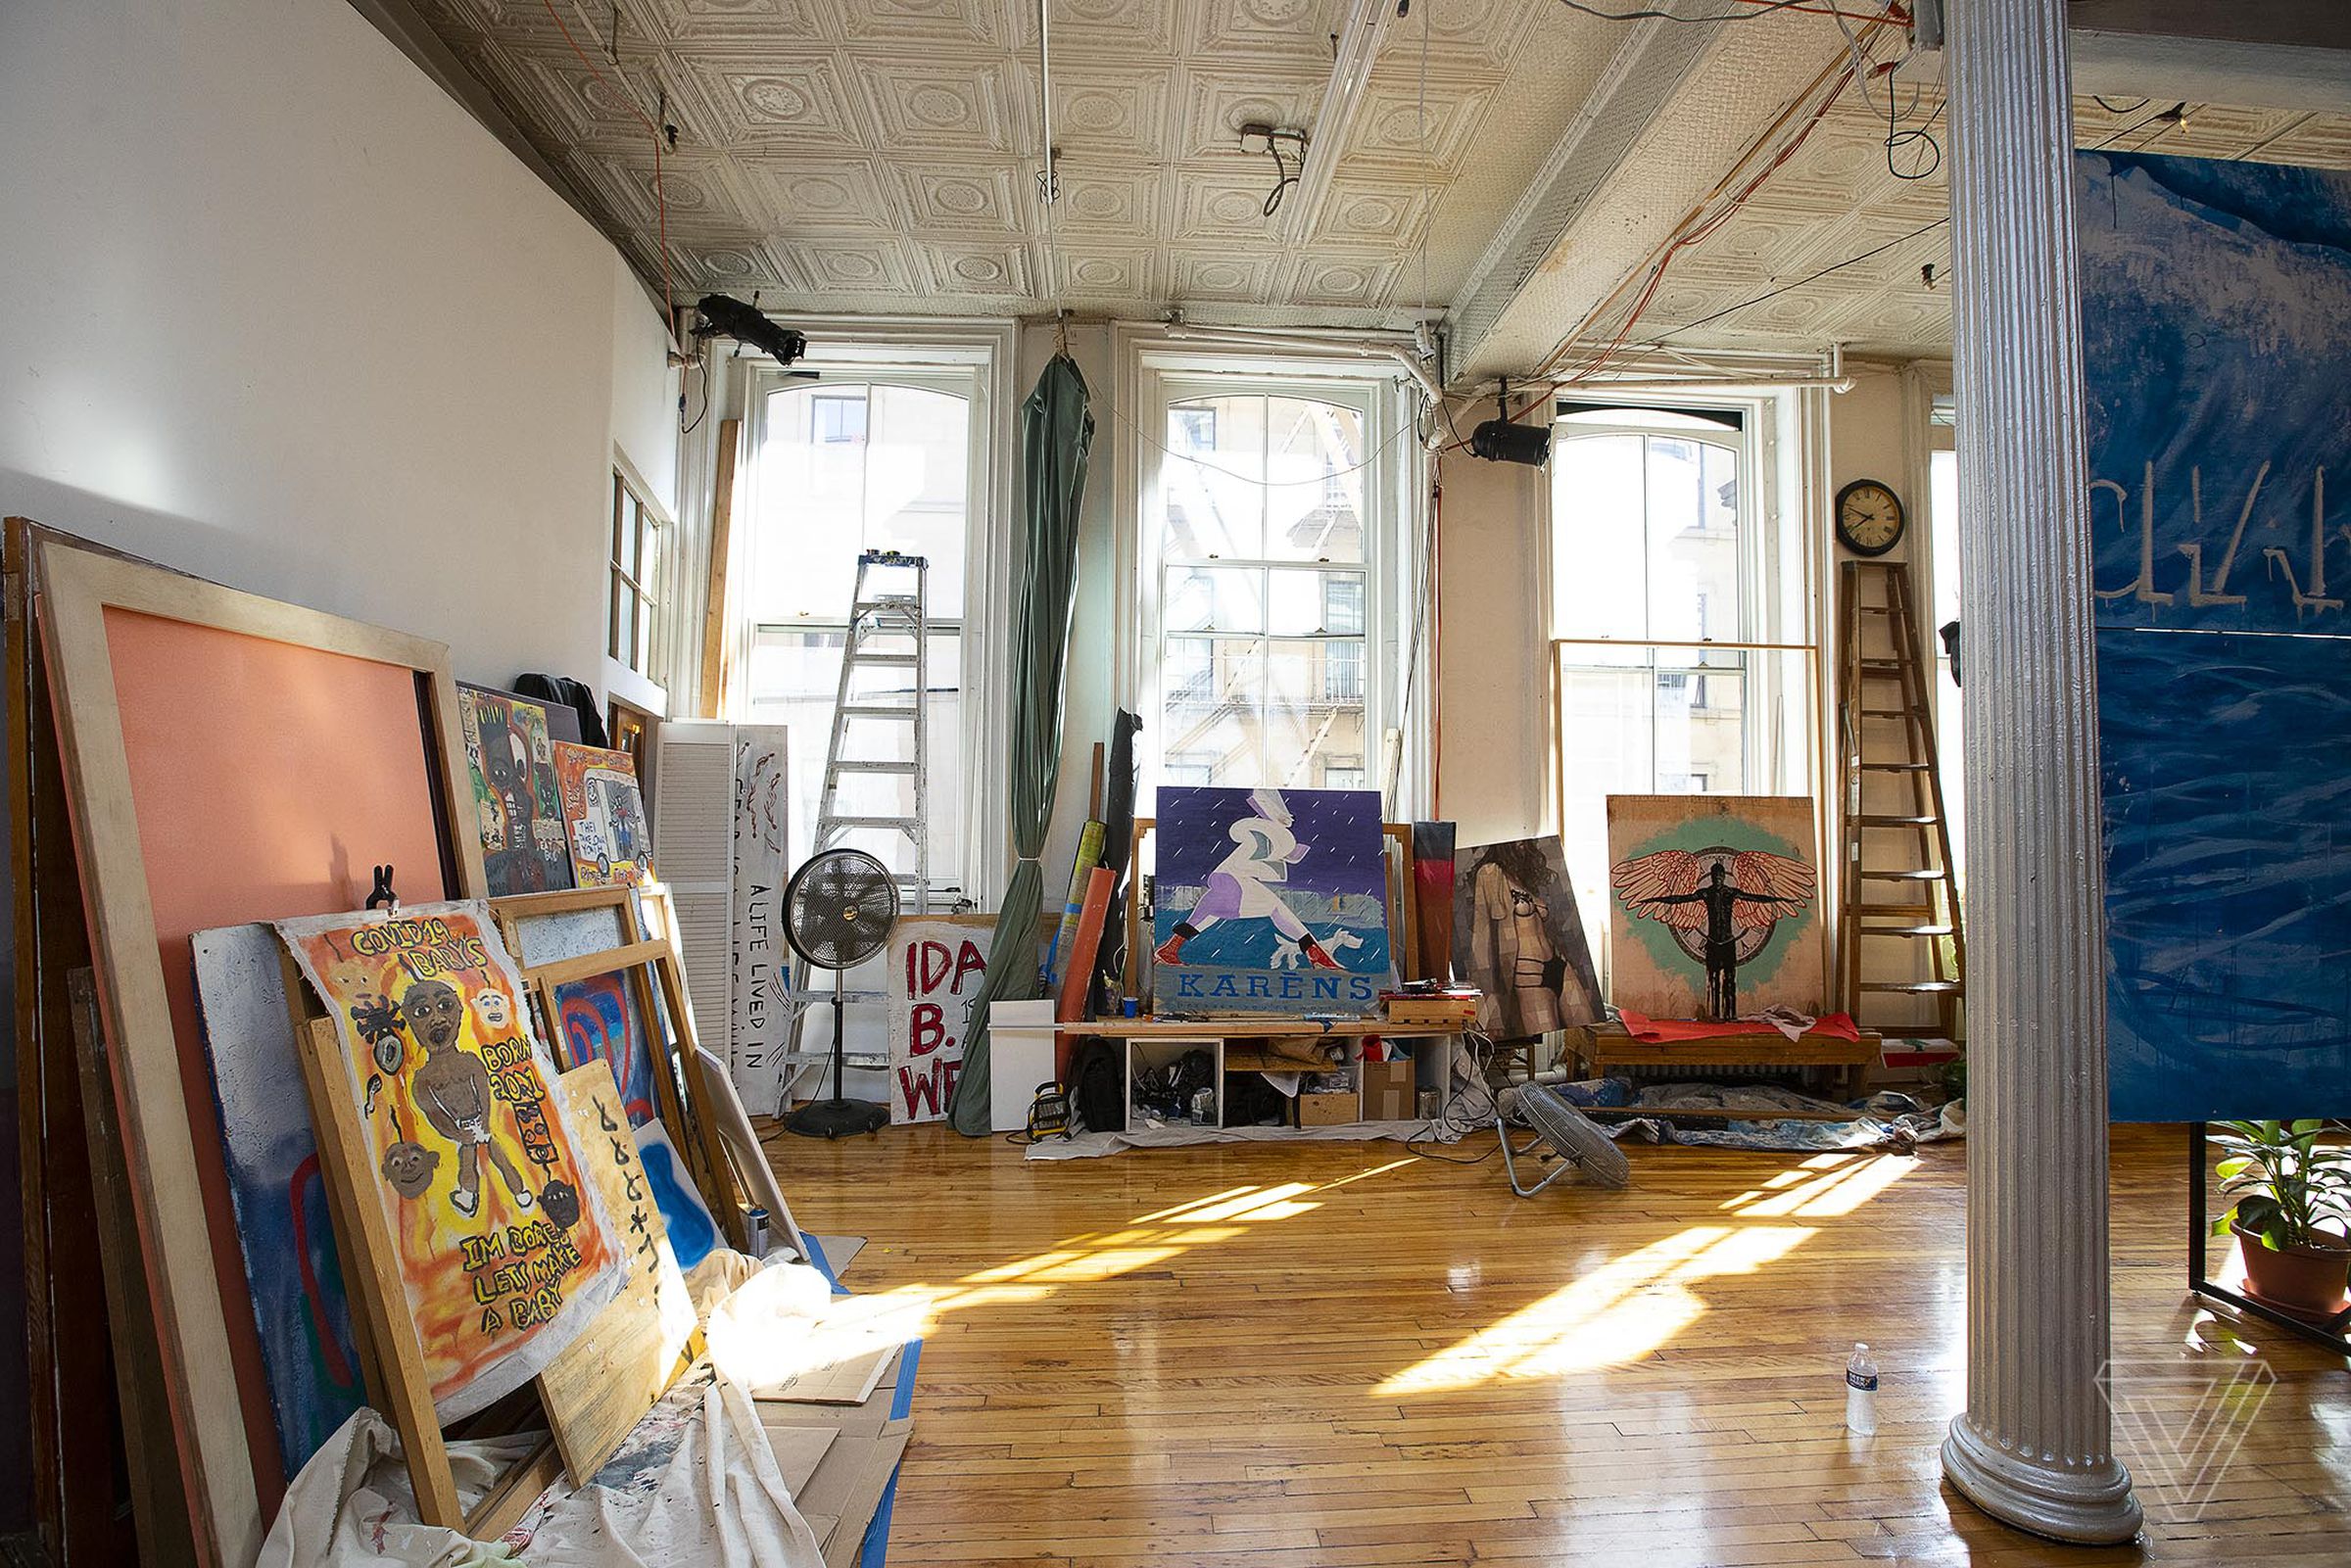 Trevor Croop’s studio loft space in SoHo stored dozens of pieces of artwork that he and other artists saved as businesses opened back up and took down painted boards.